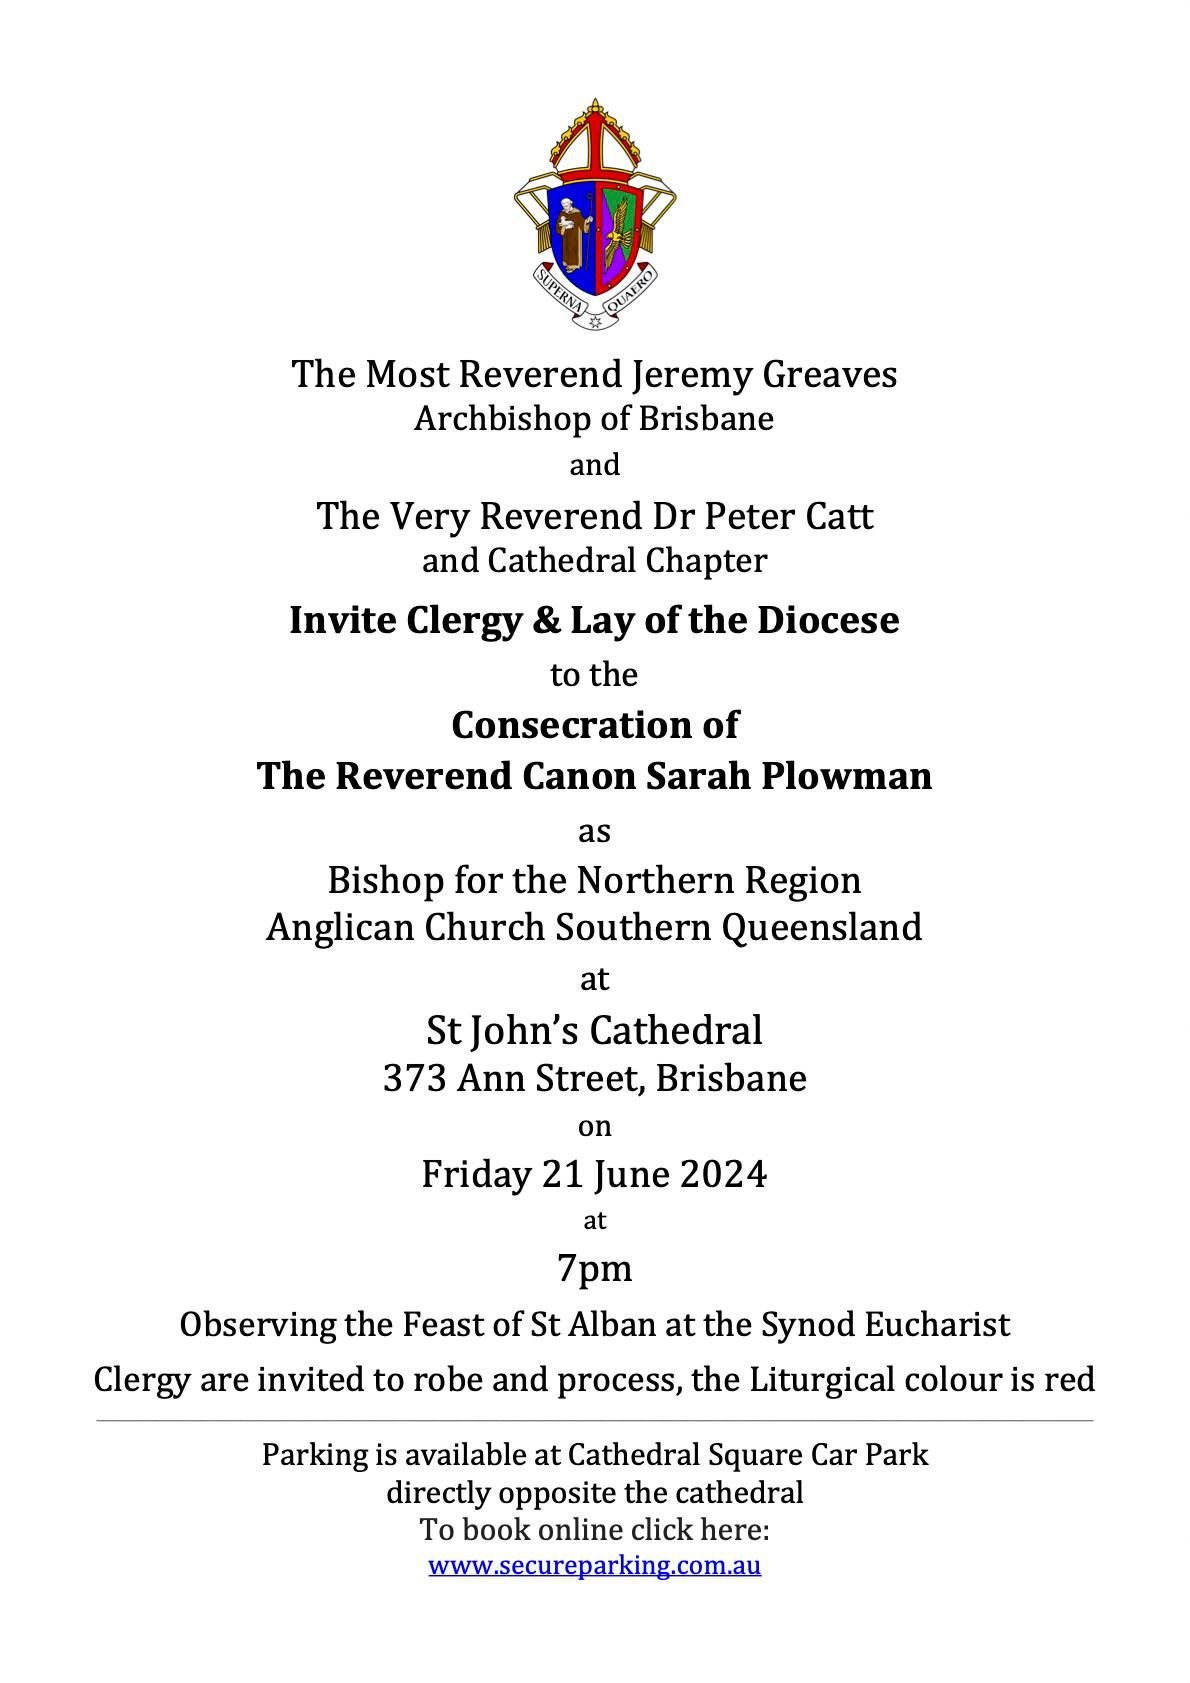 Consecration of The Reverend Canon Sarah Plowman as Bishop for the Northern Region